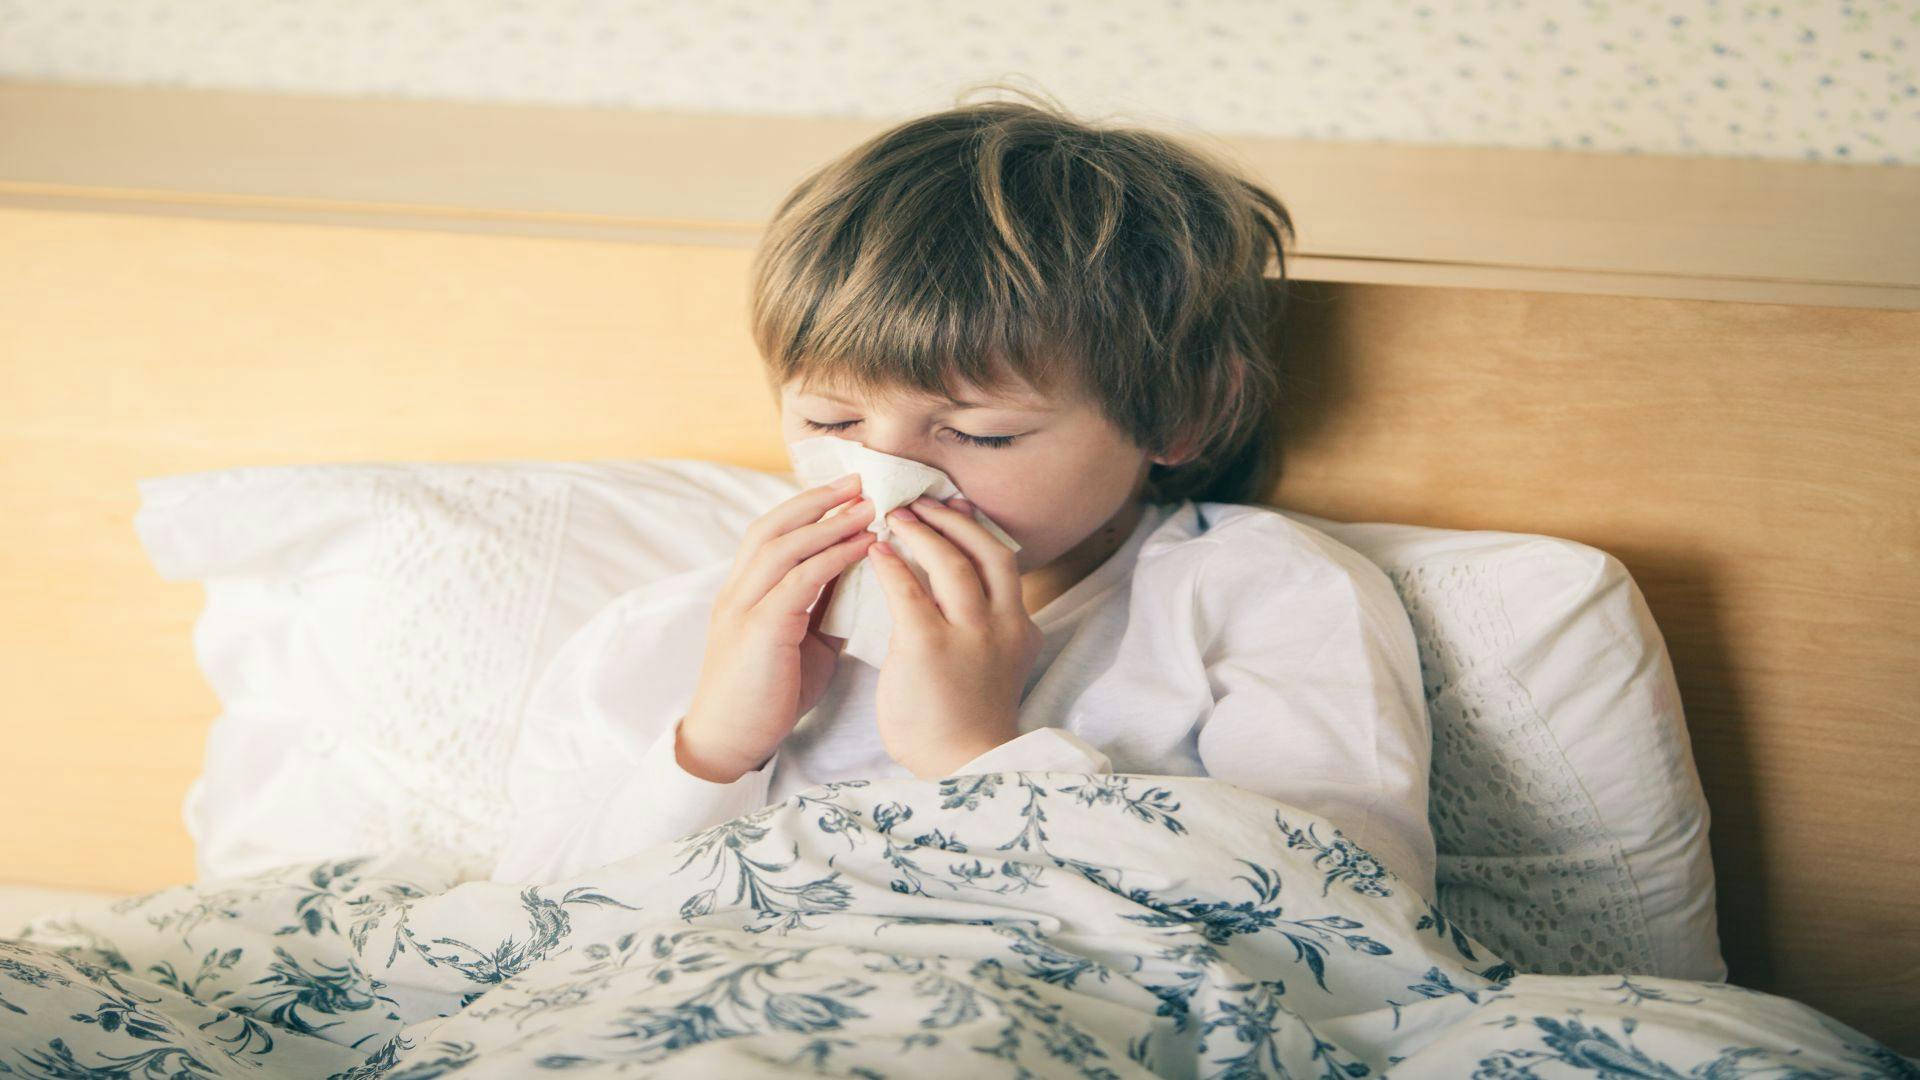 For Children With Respiratory Infections, Antibiotics With Narrower Targets are Better